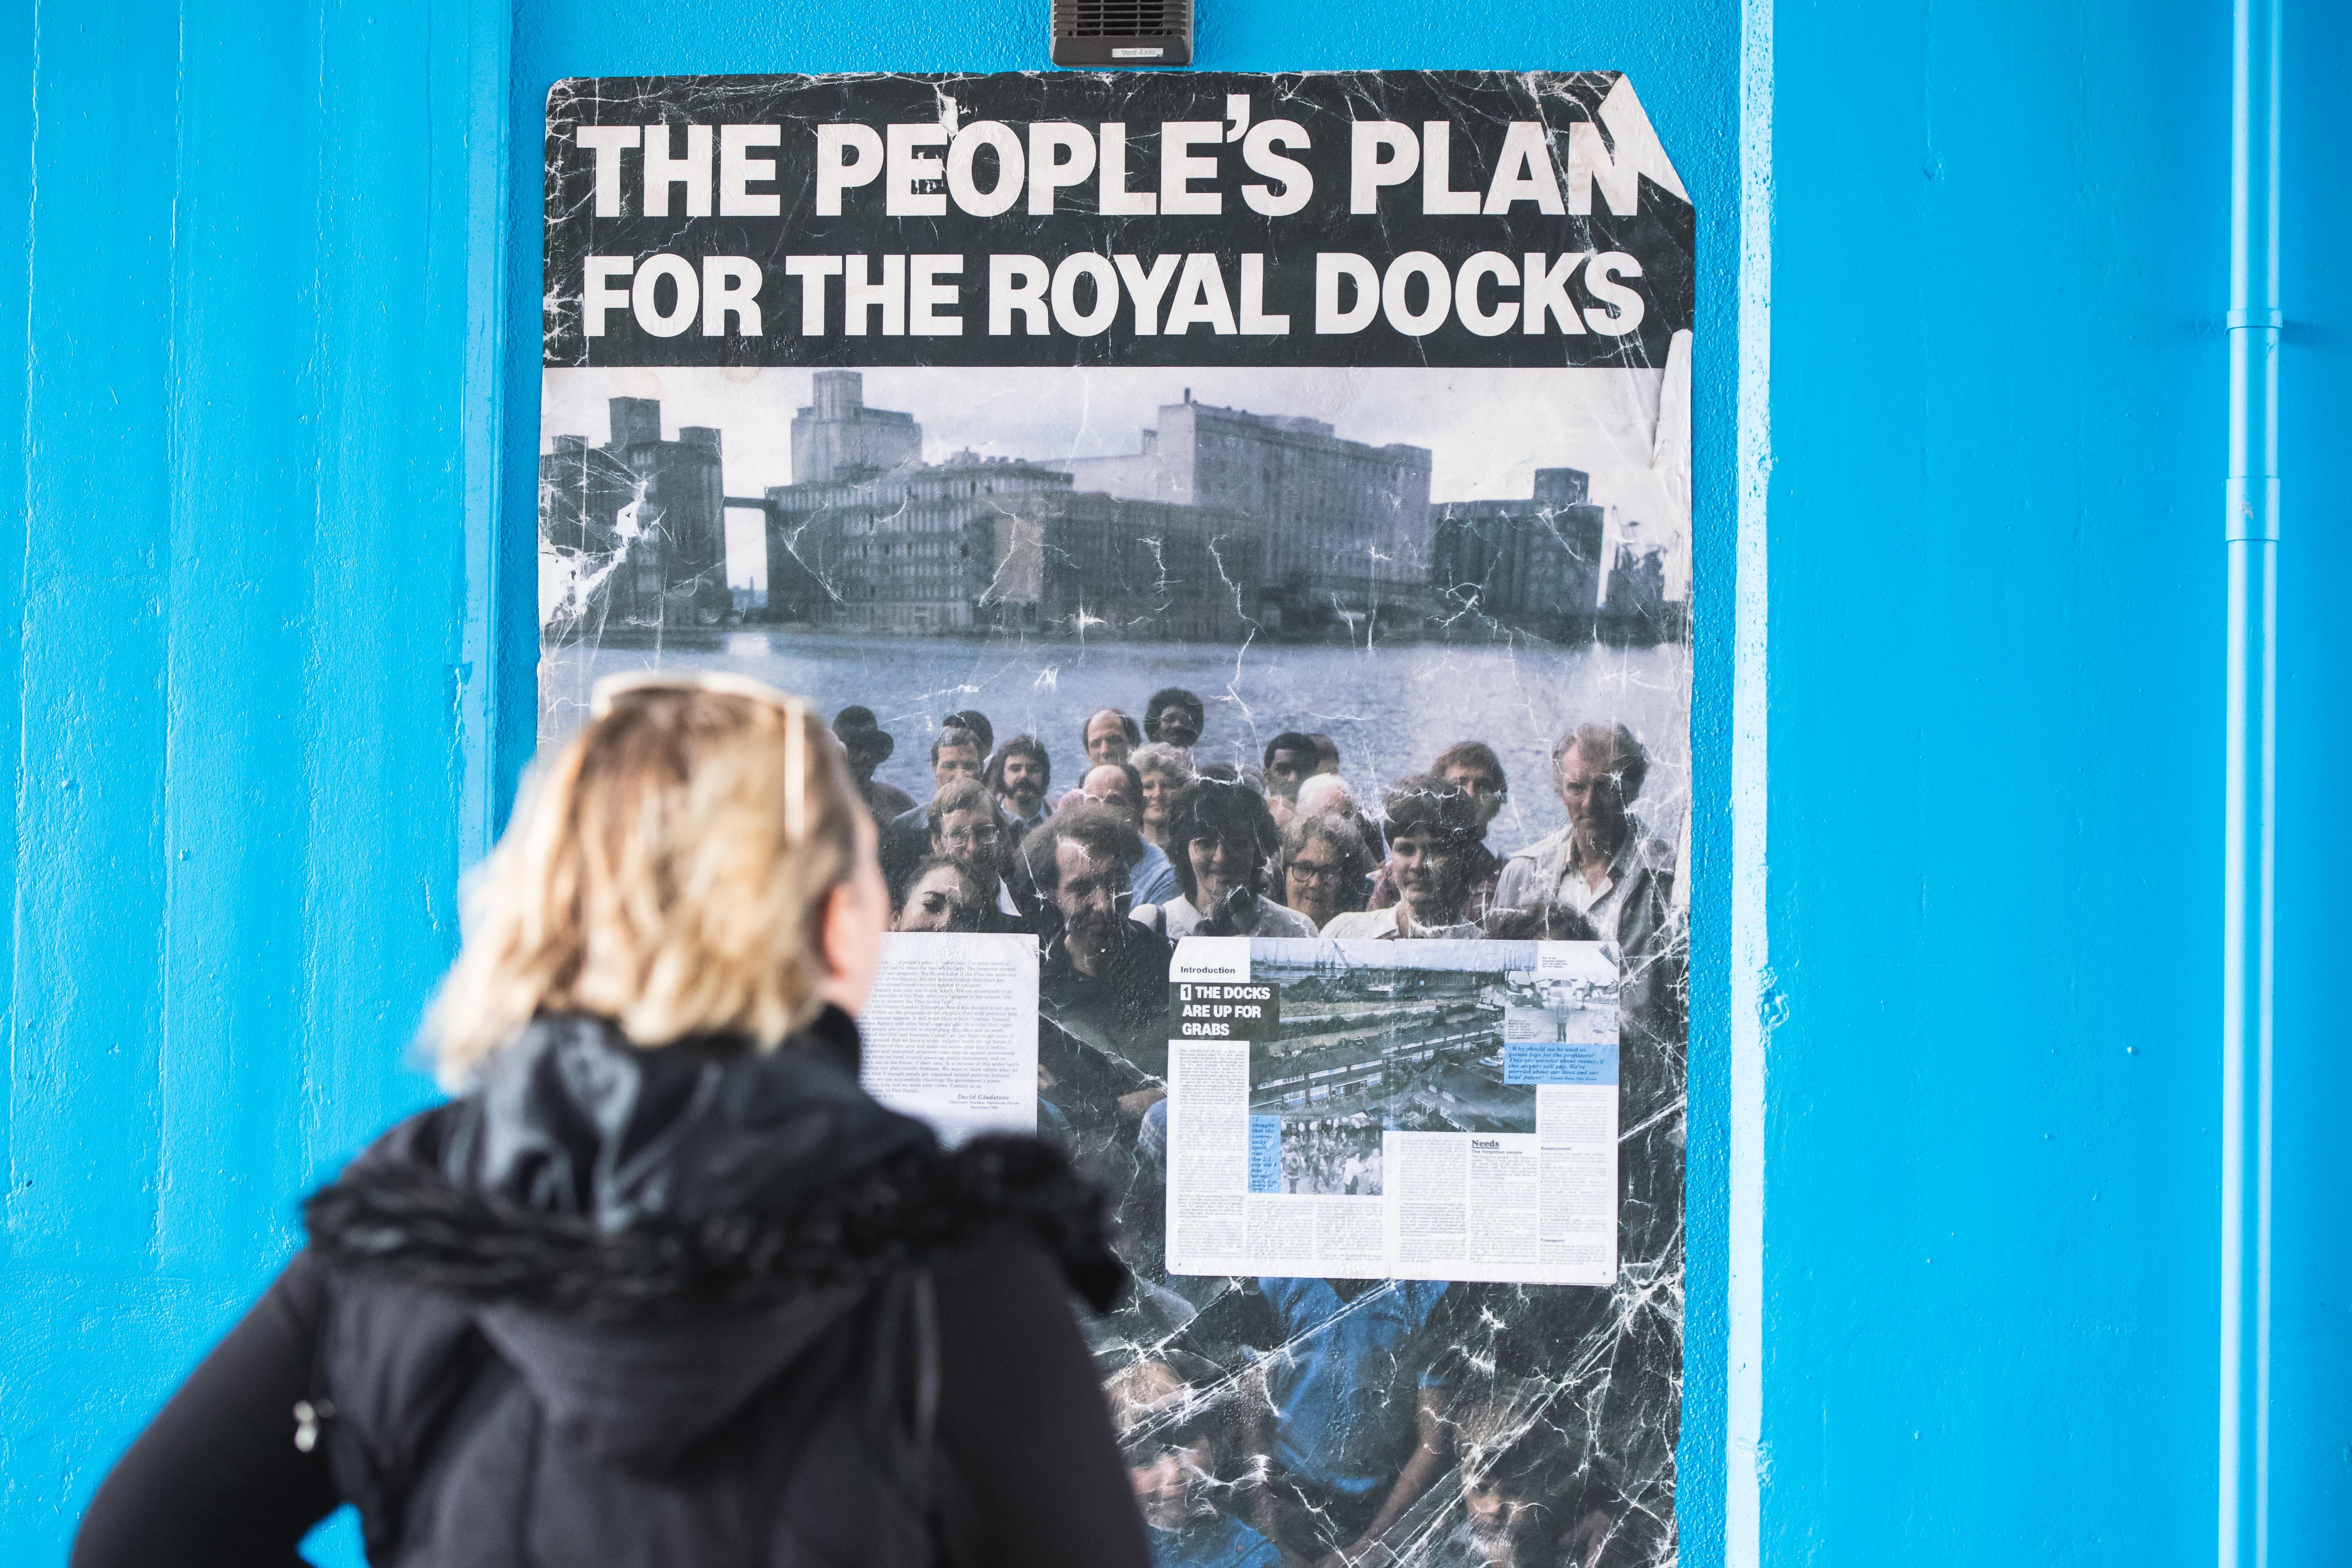 Blonde woman reads "the people's plan" poster